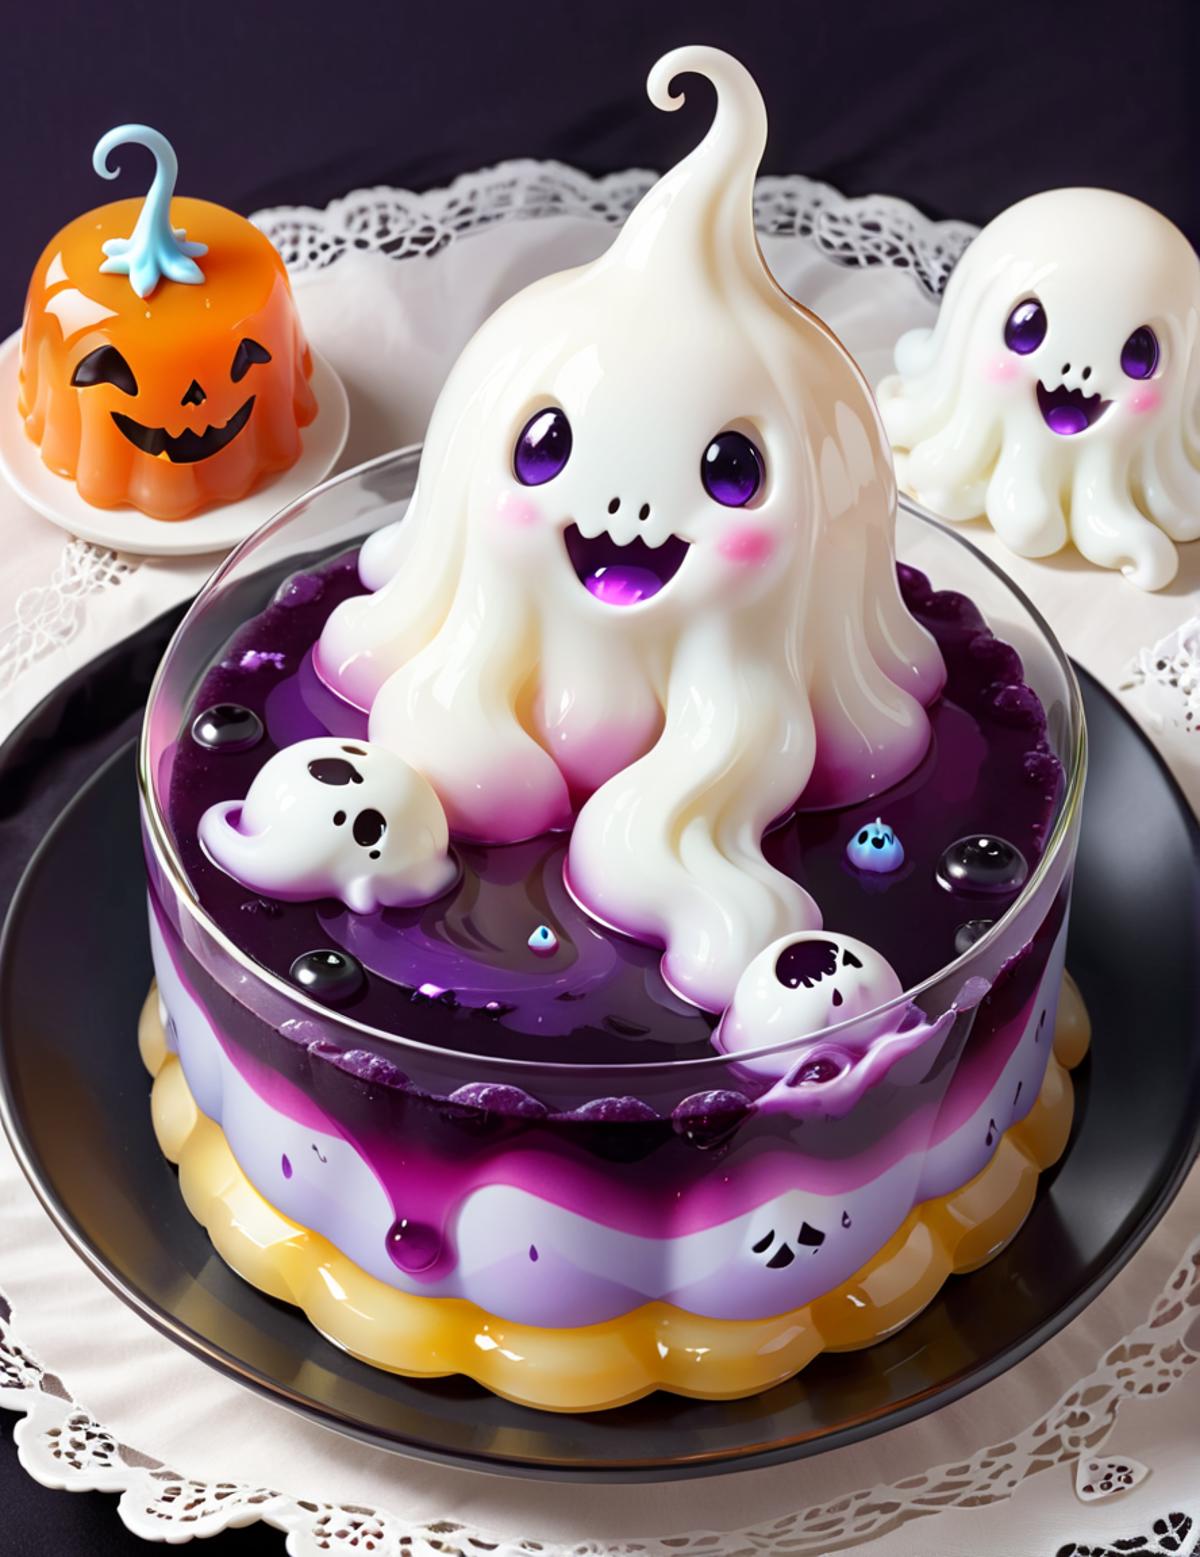 A cake with white frosting and purple liquid in a glass bowl, featuring a cute design of a ghost and a spooky pumpkin.